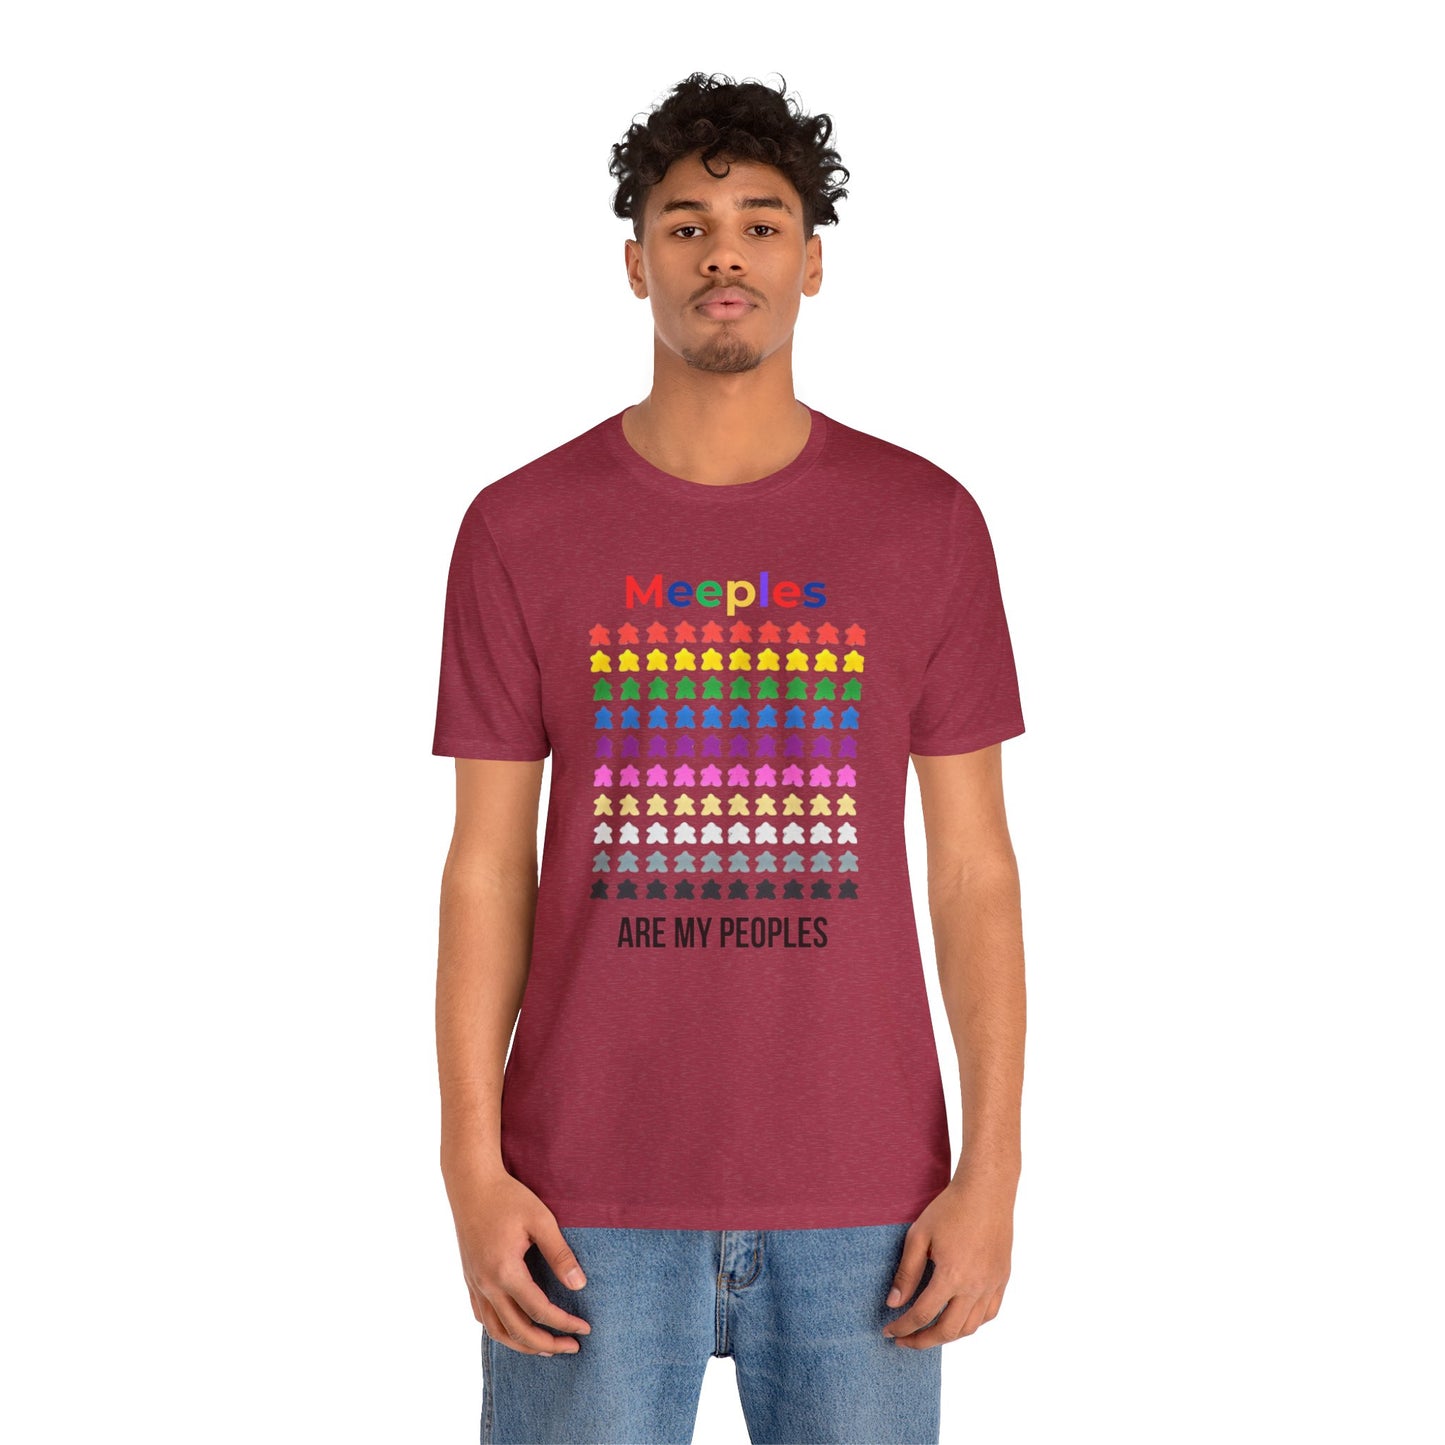 Board Gamer Tee Shirt. Great gift for Board Game Lover. Play more Board Games!